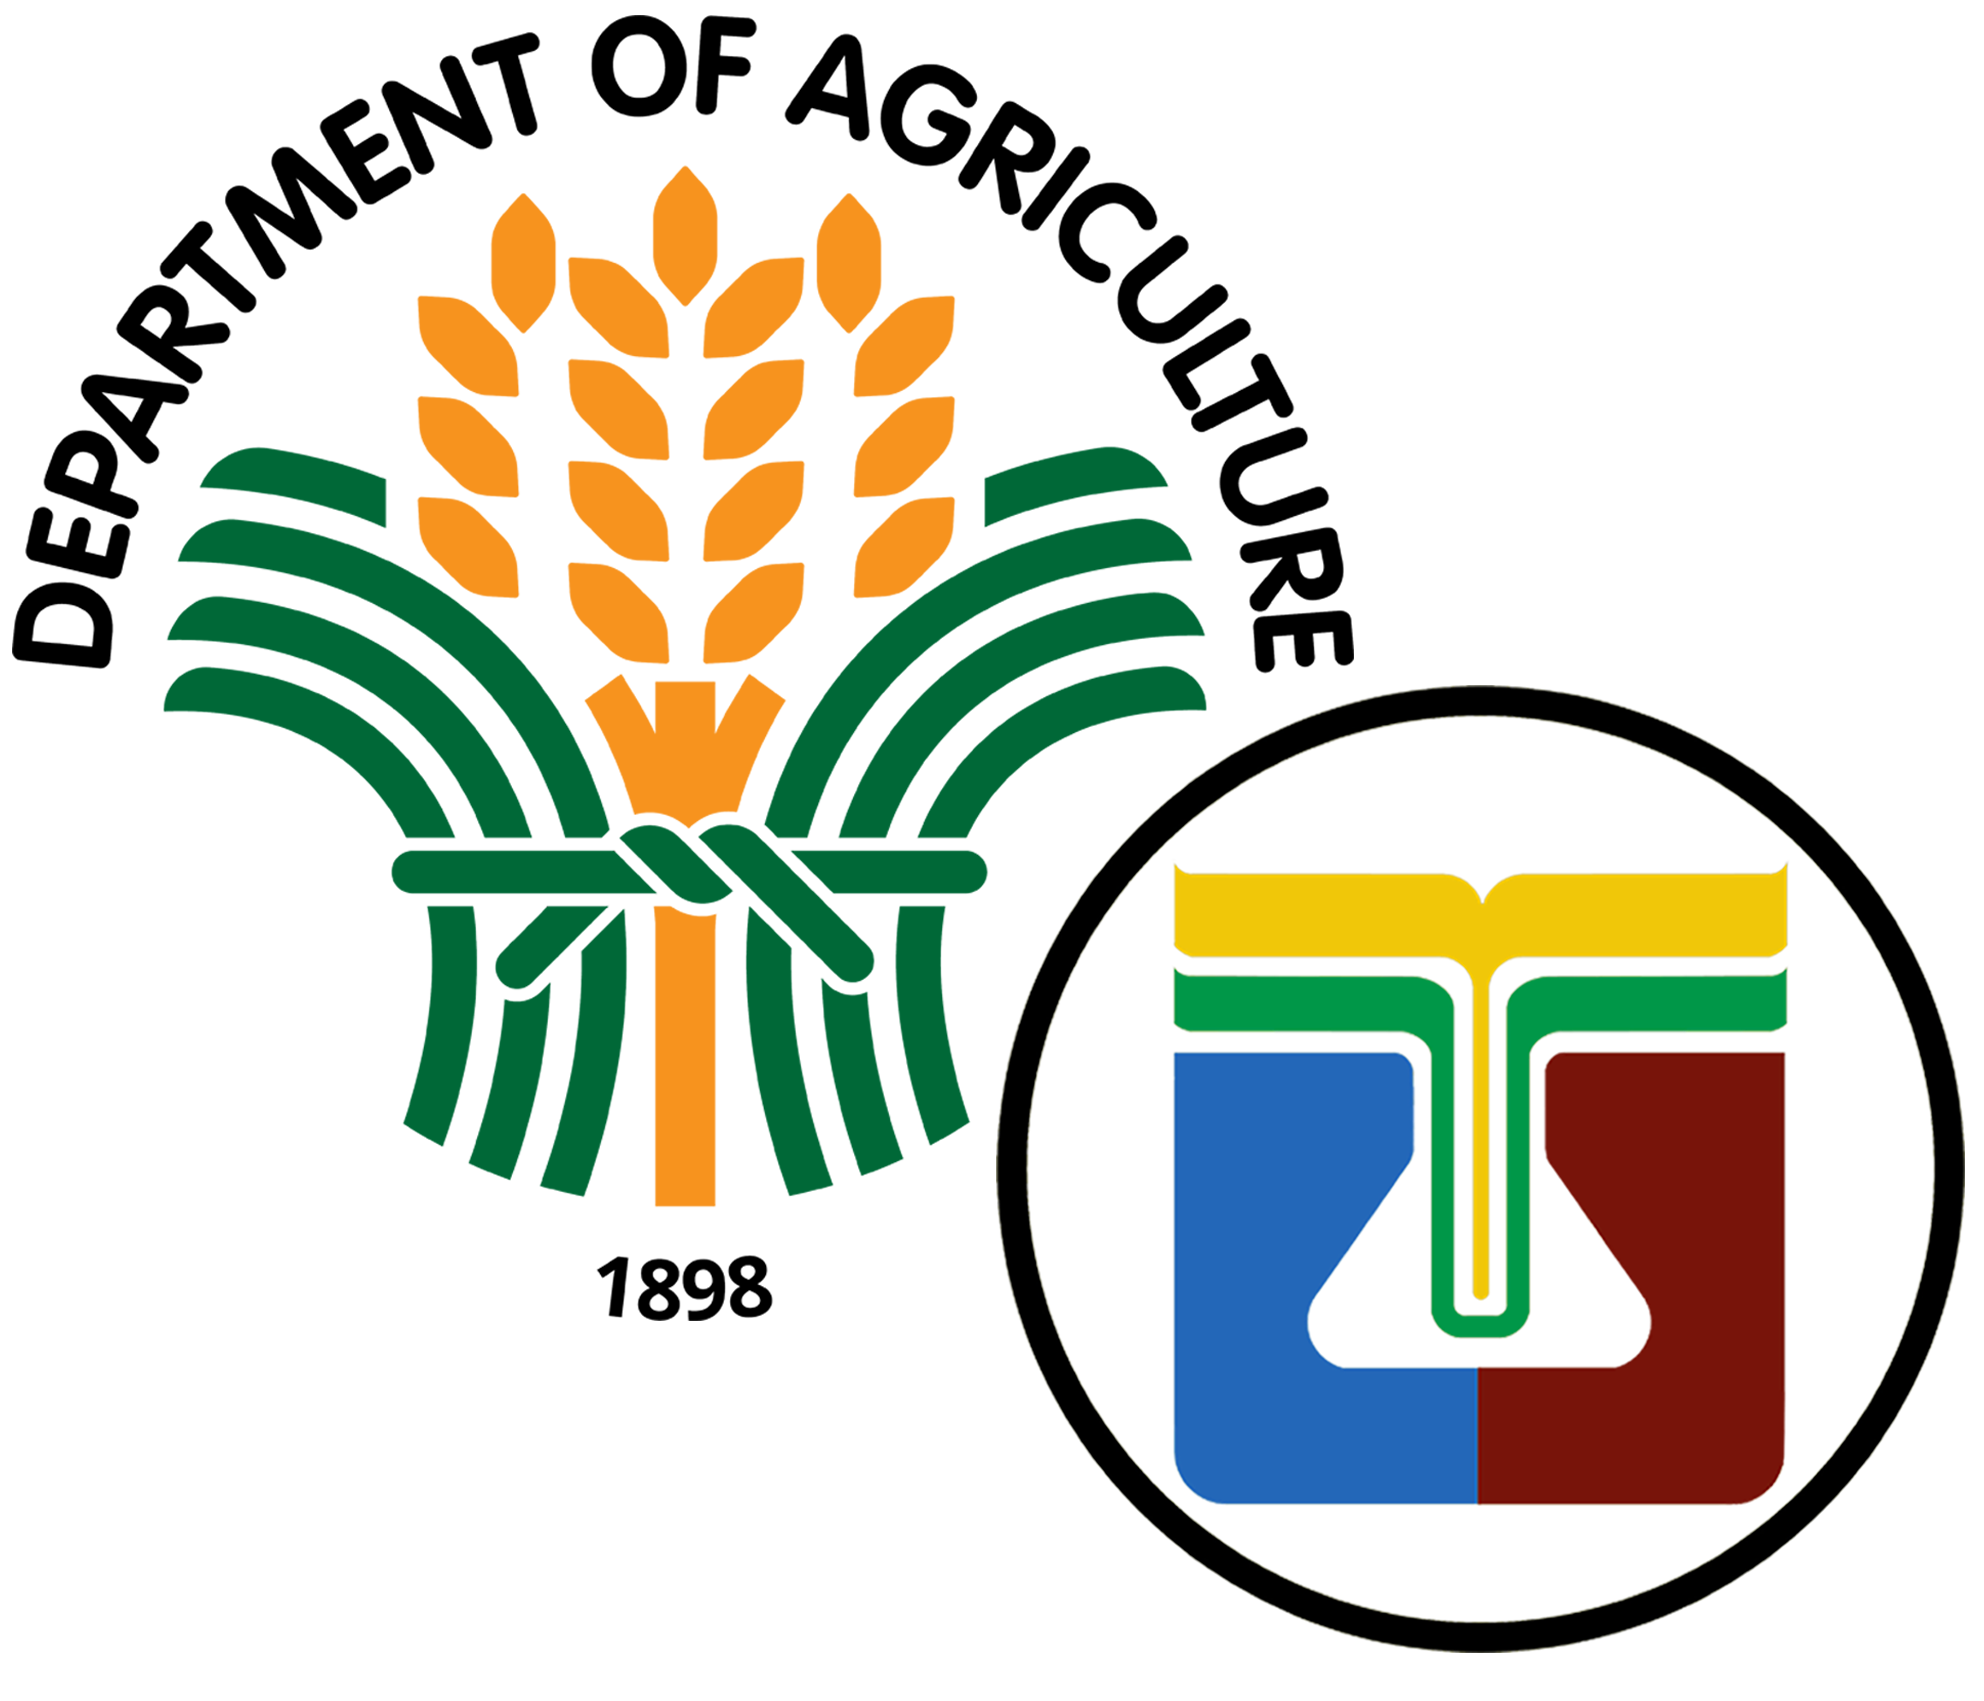 Department of Agriculture - Bureau of Soils and Water Management, Republic of the Philippines